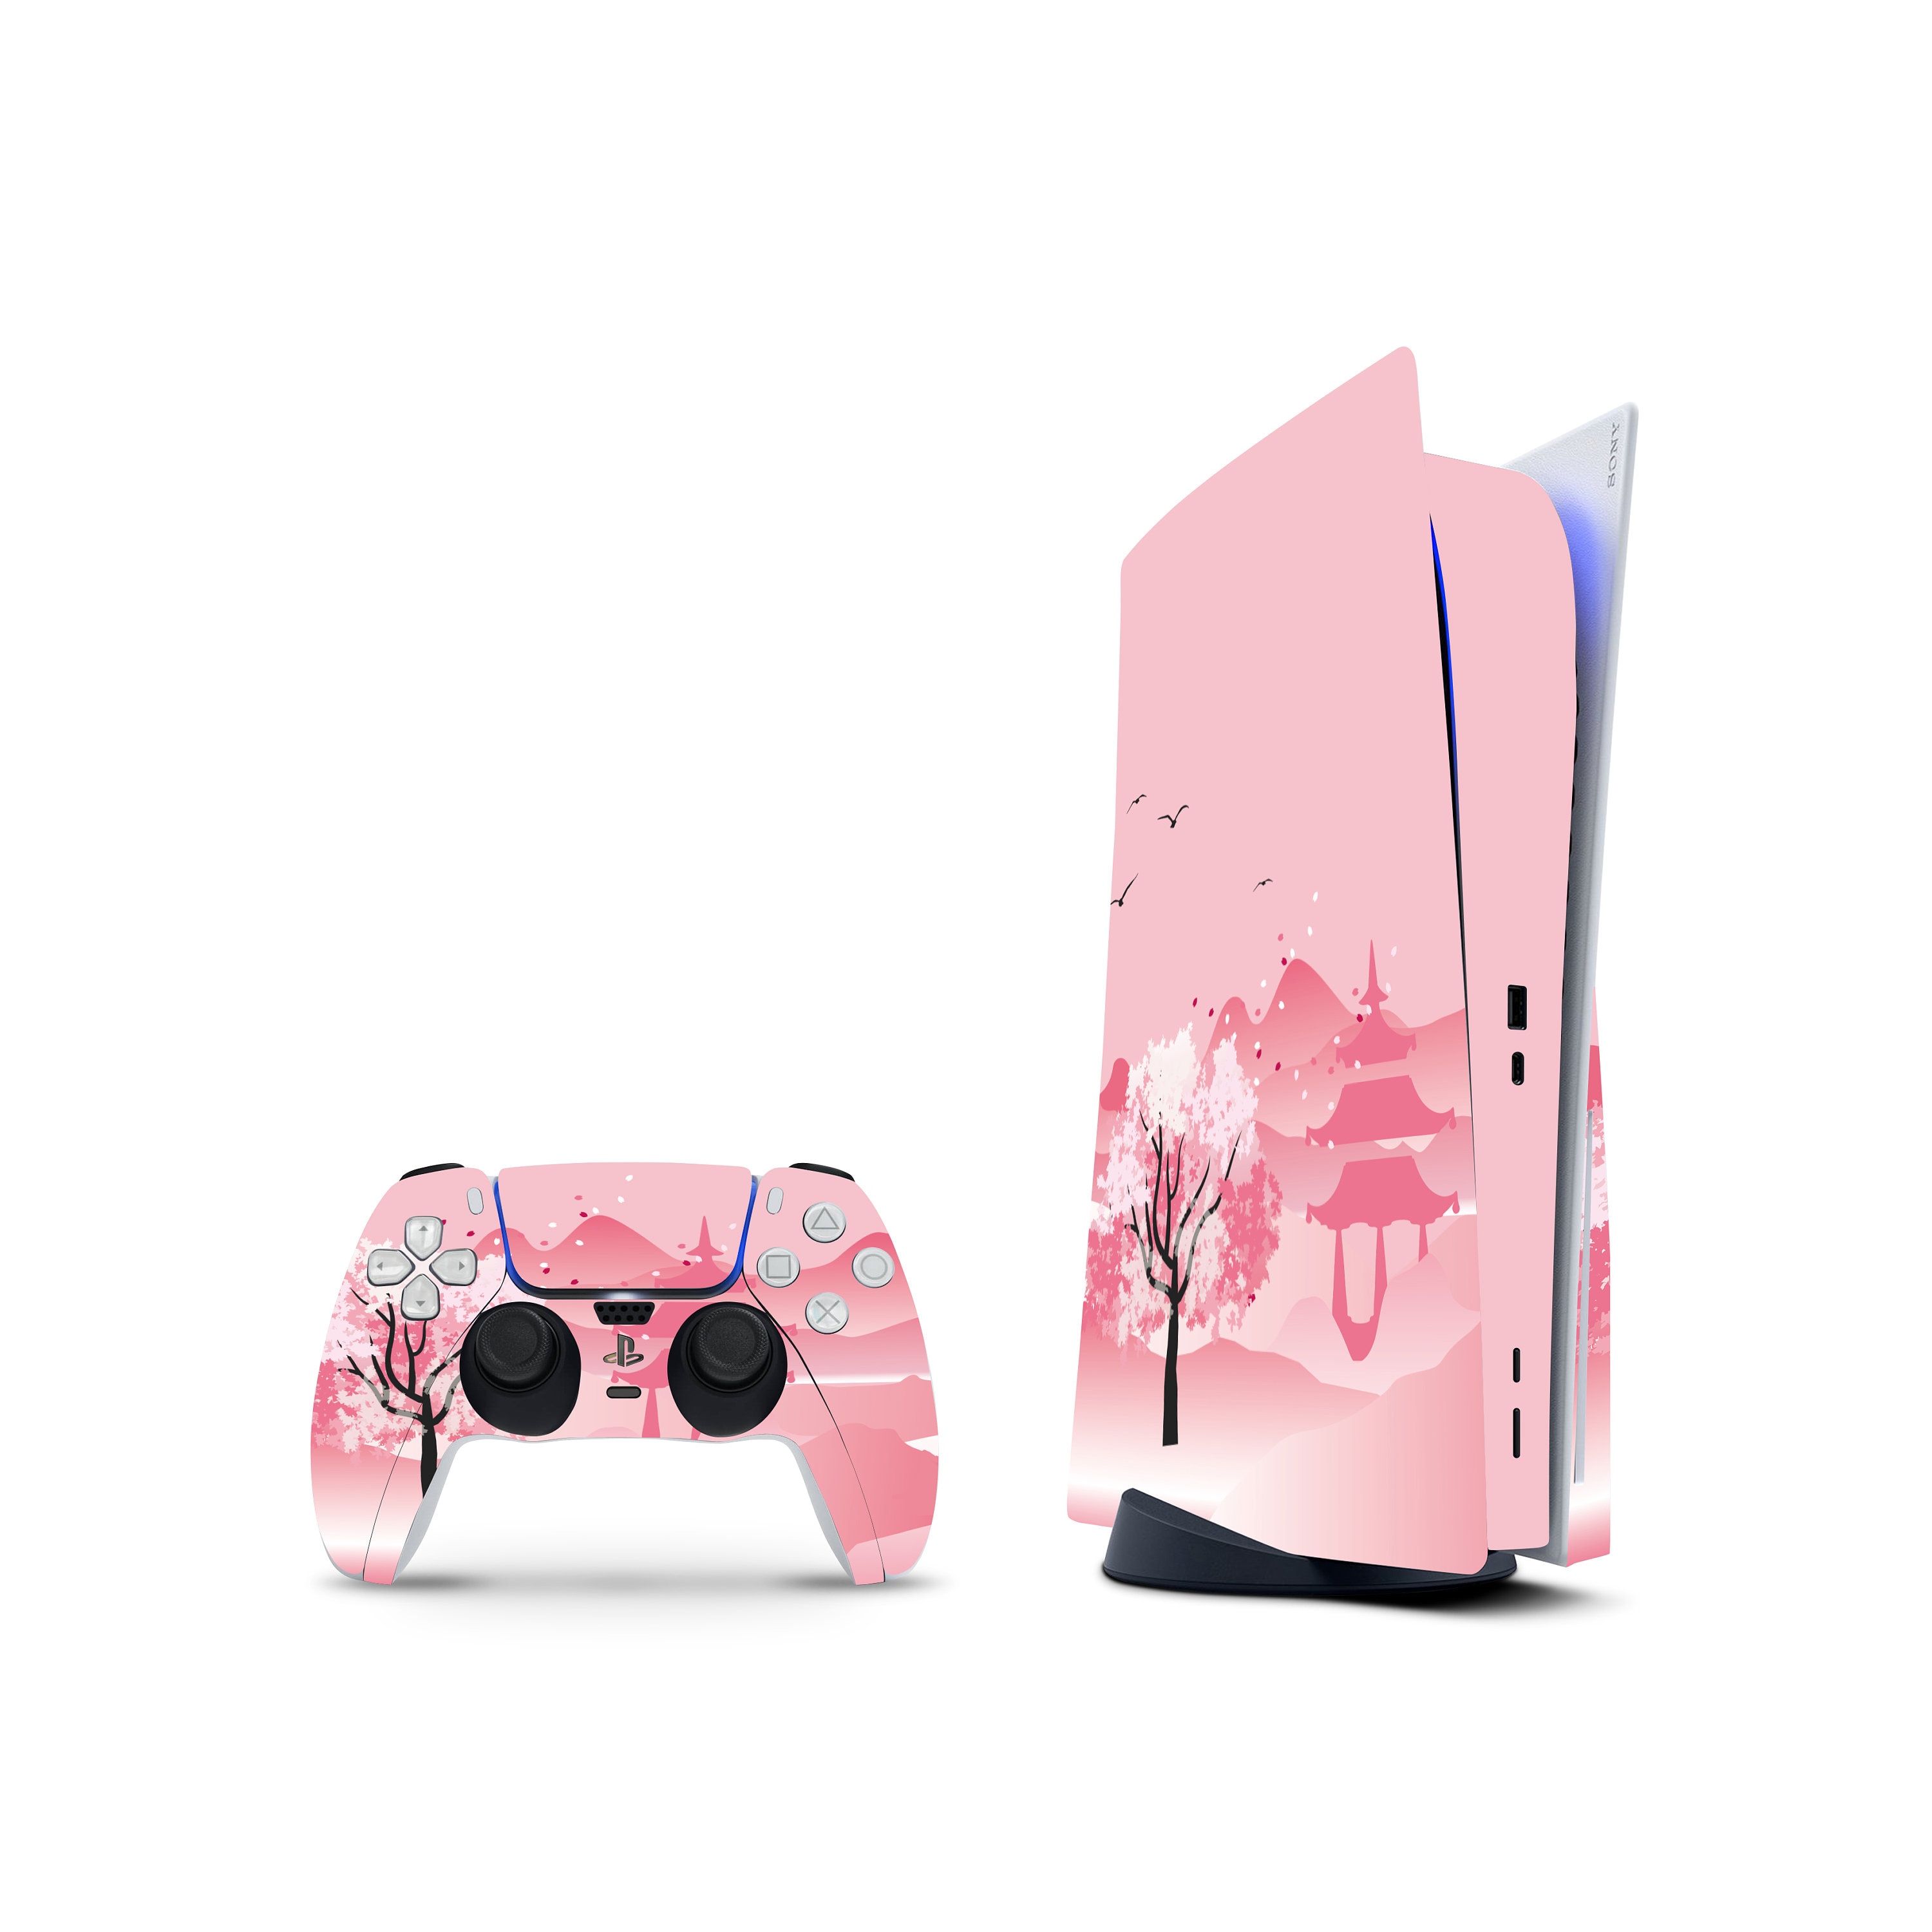 PlayStation 5 Skin // Silver Glitter // Best Selling Vinyl Decal Sticker 3M  Vinyl // Full Coverage PS5 Console and Controller